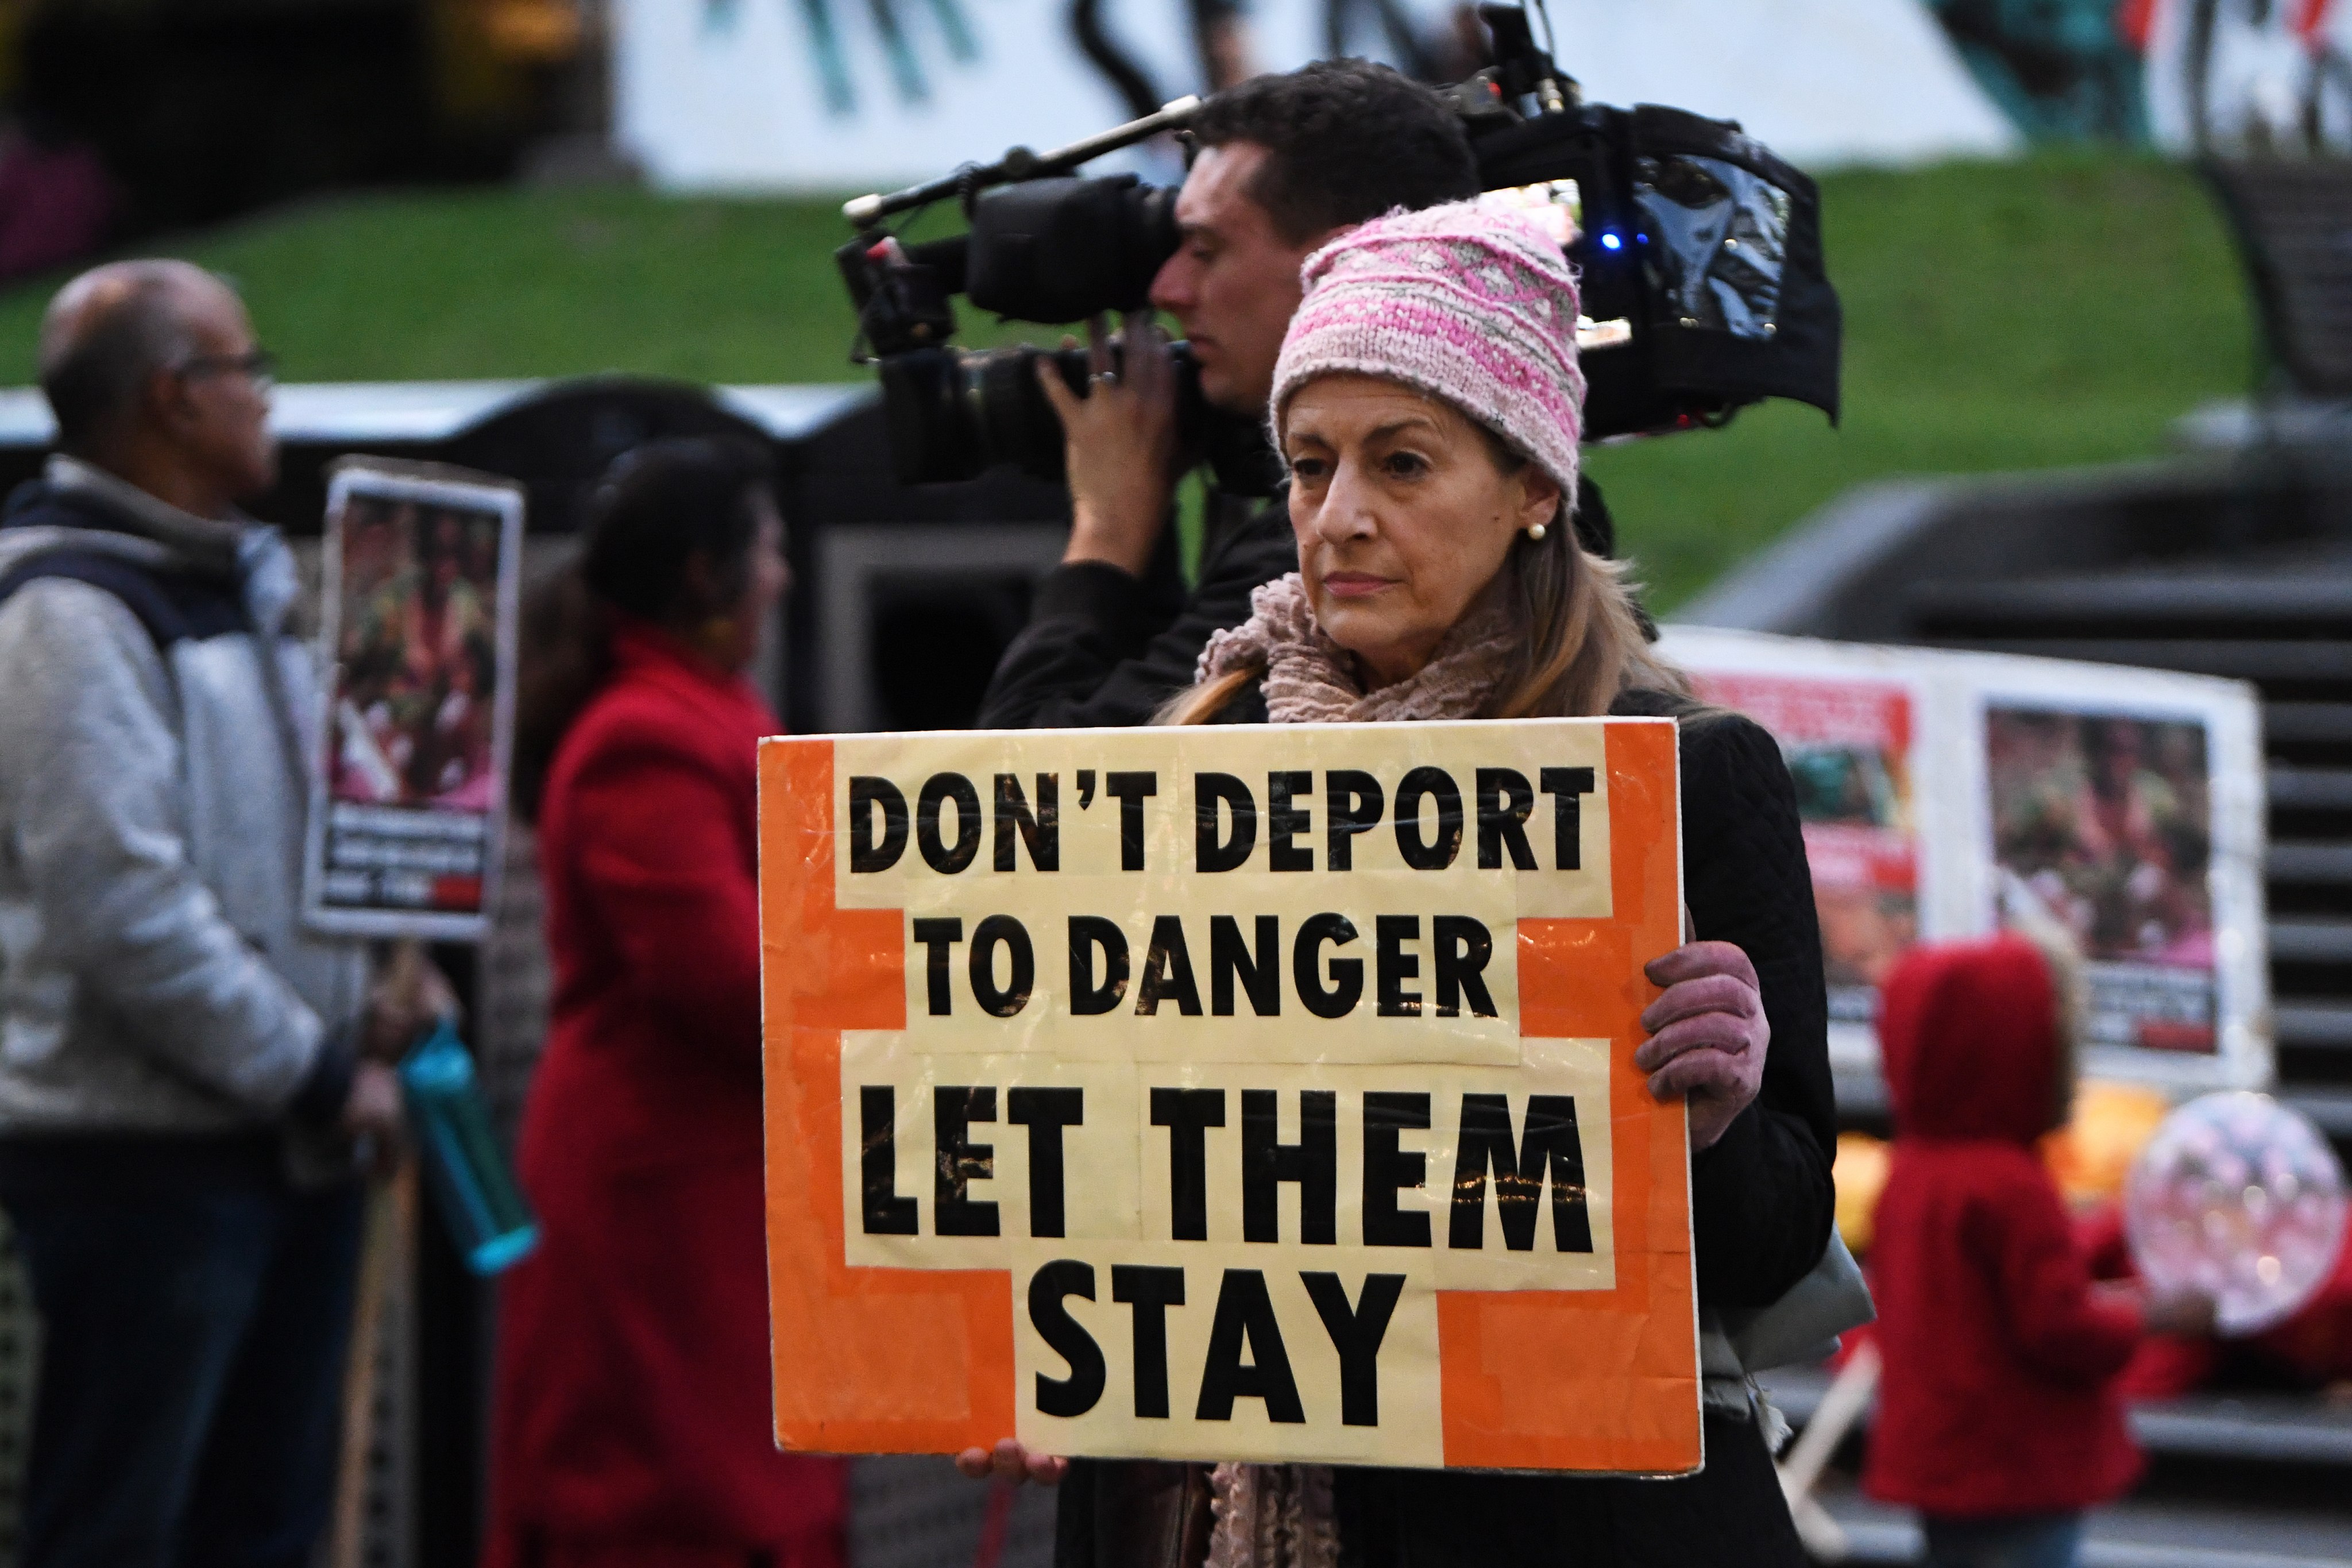 Protesters at a May 2019 rally in Melbourne. For two decades, the Australian government had, on national security grounds, been able to detain illegal arrivals to the country for life. Photo: EPA-EFE